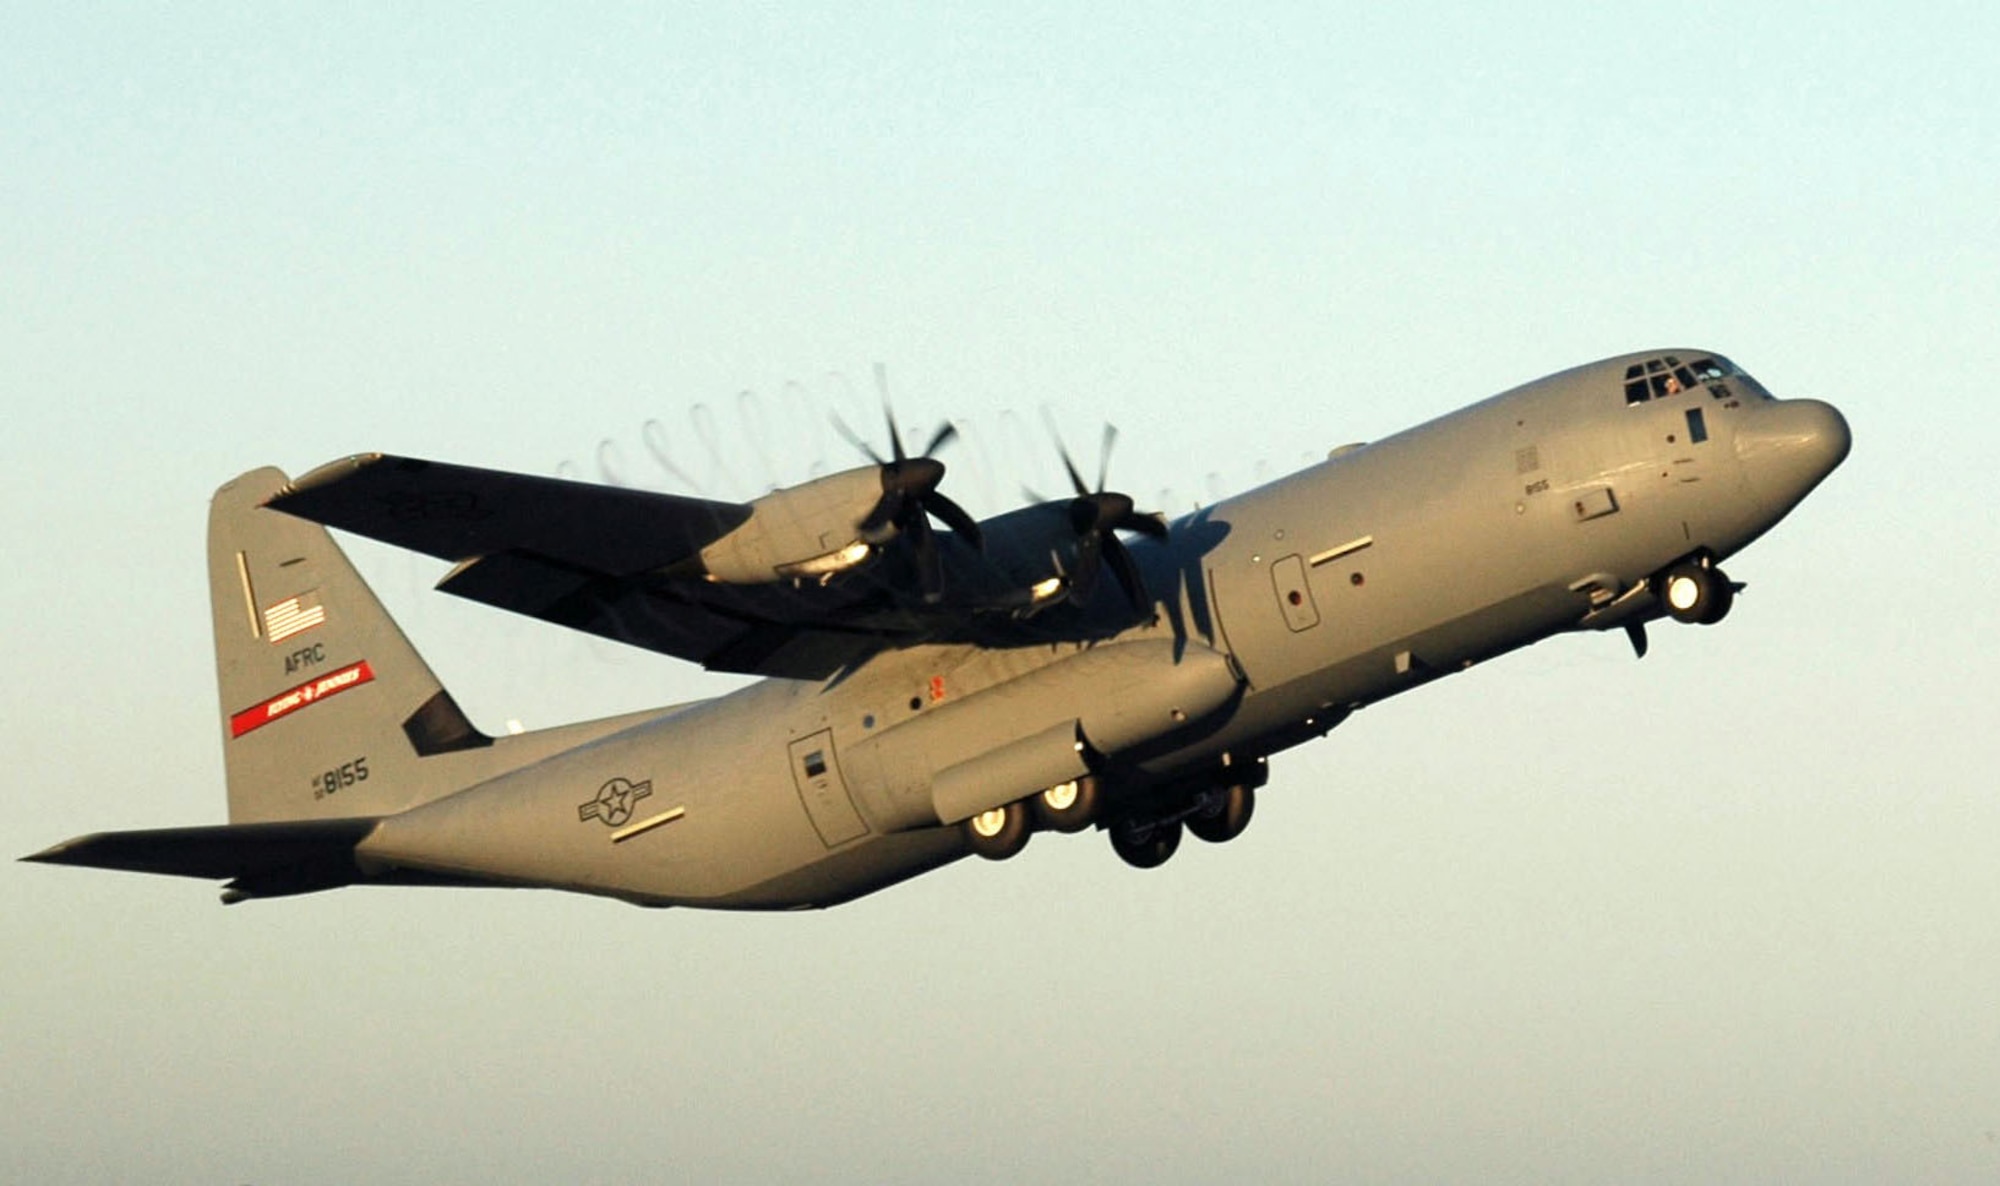 SAN ANTONIO -- A C-130J Hercules, like the one shown here, made a first-ever combat airdrop June 30.  The mission supported an Army air assistance request for troop re-supply and civic assistance to be dropped in the vicinity of Kandahar, Afghanistan.  (Air Force file photo)